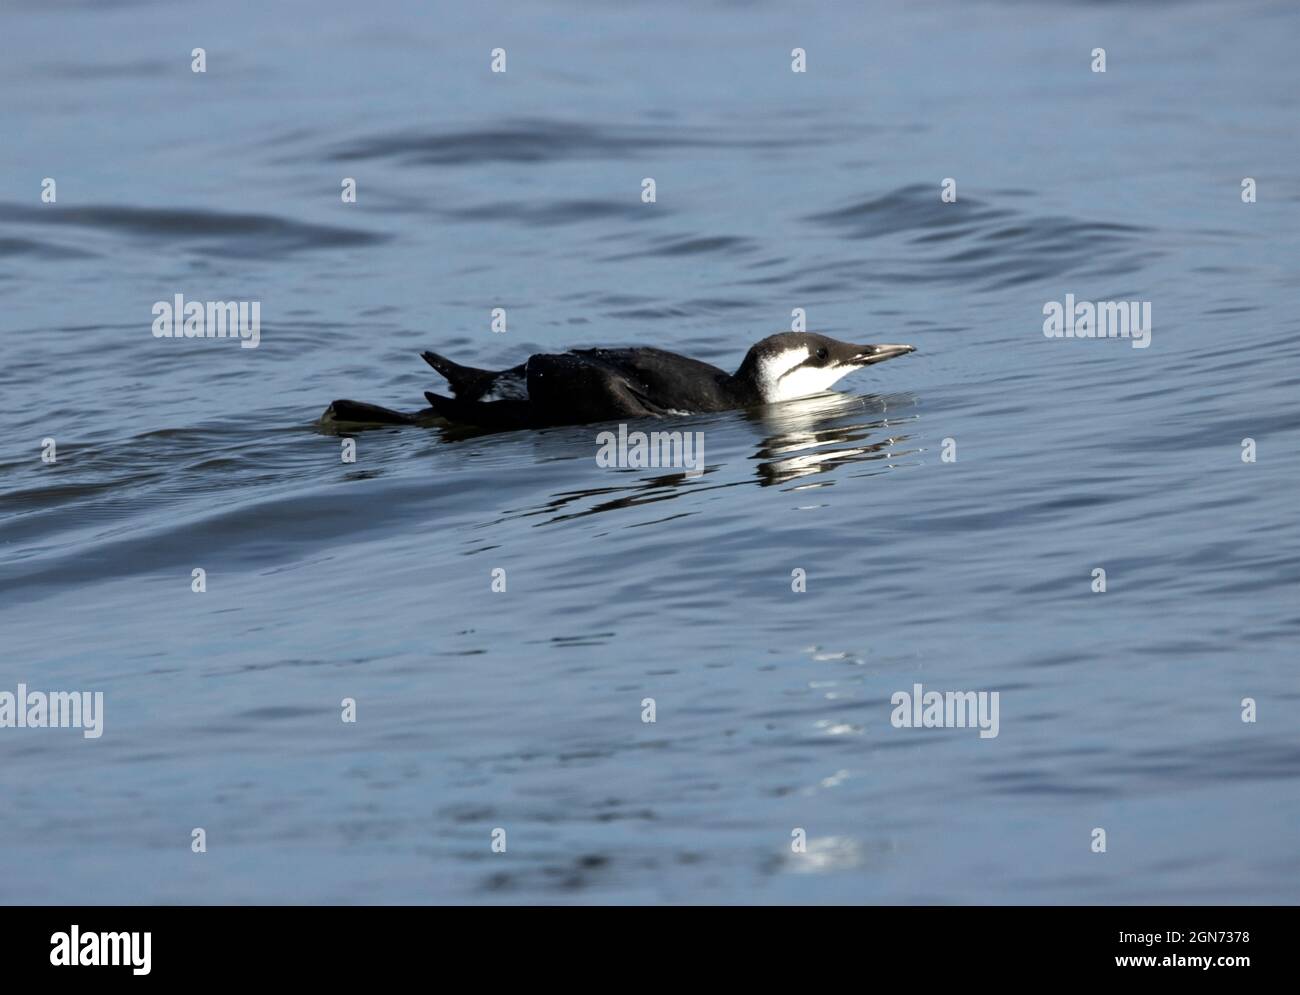 The Guillemot is a member of the Auk family that breeds along the rocky cliffs and off-shore islands around the UK. They hunt fish underwater Stock Photo